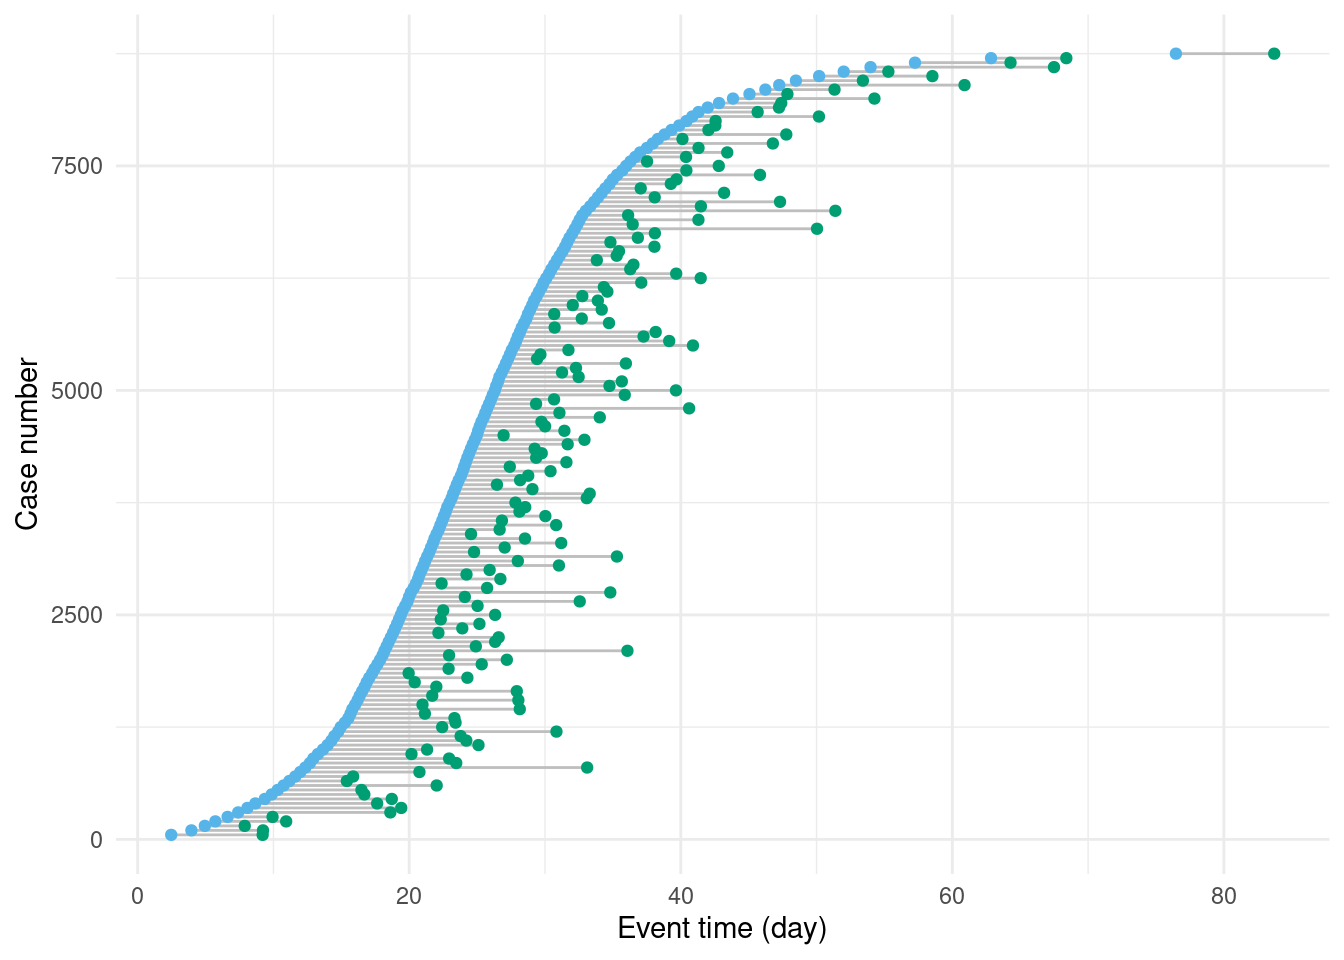 Secondary events (in green) occur with a delay drawn from the lognormal distribution (Figure 1.2). As with Figure 1.1, to make this figure easier to read, only every 50th case is shown.